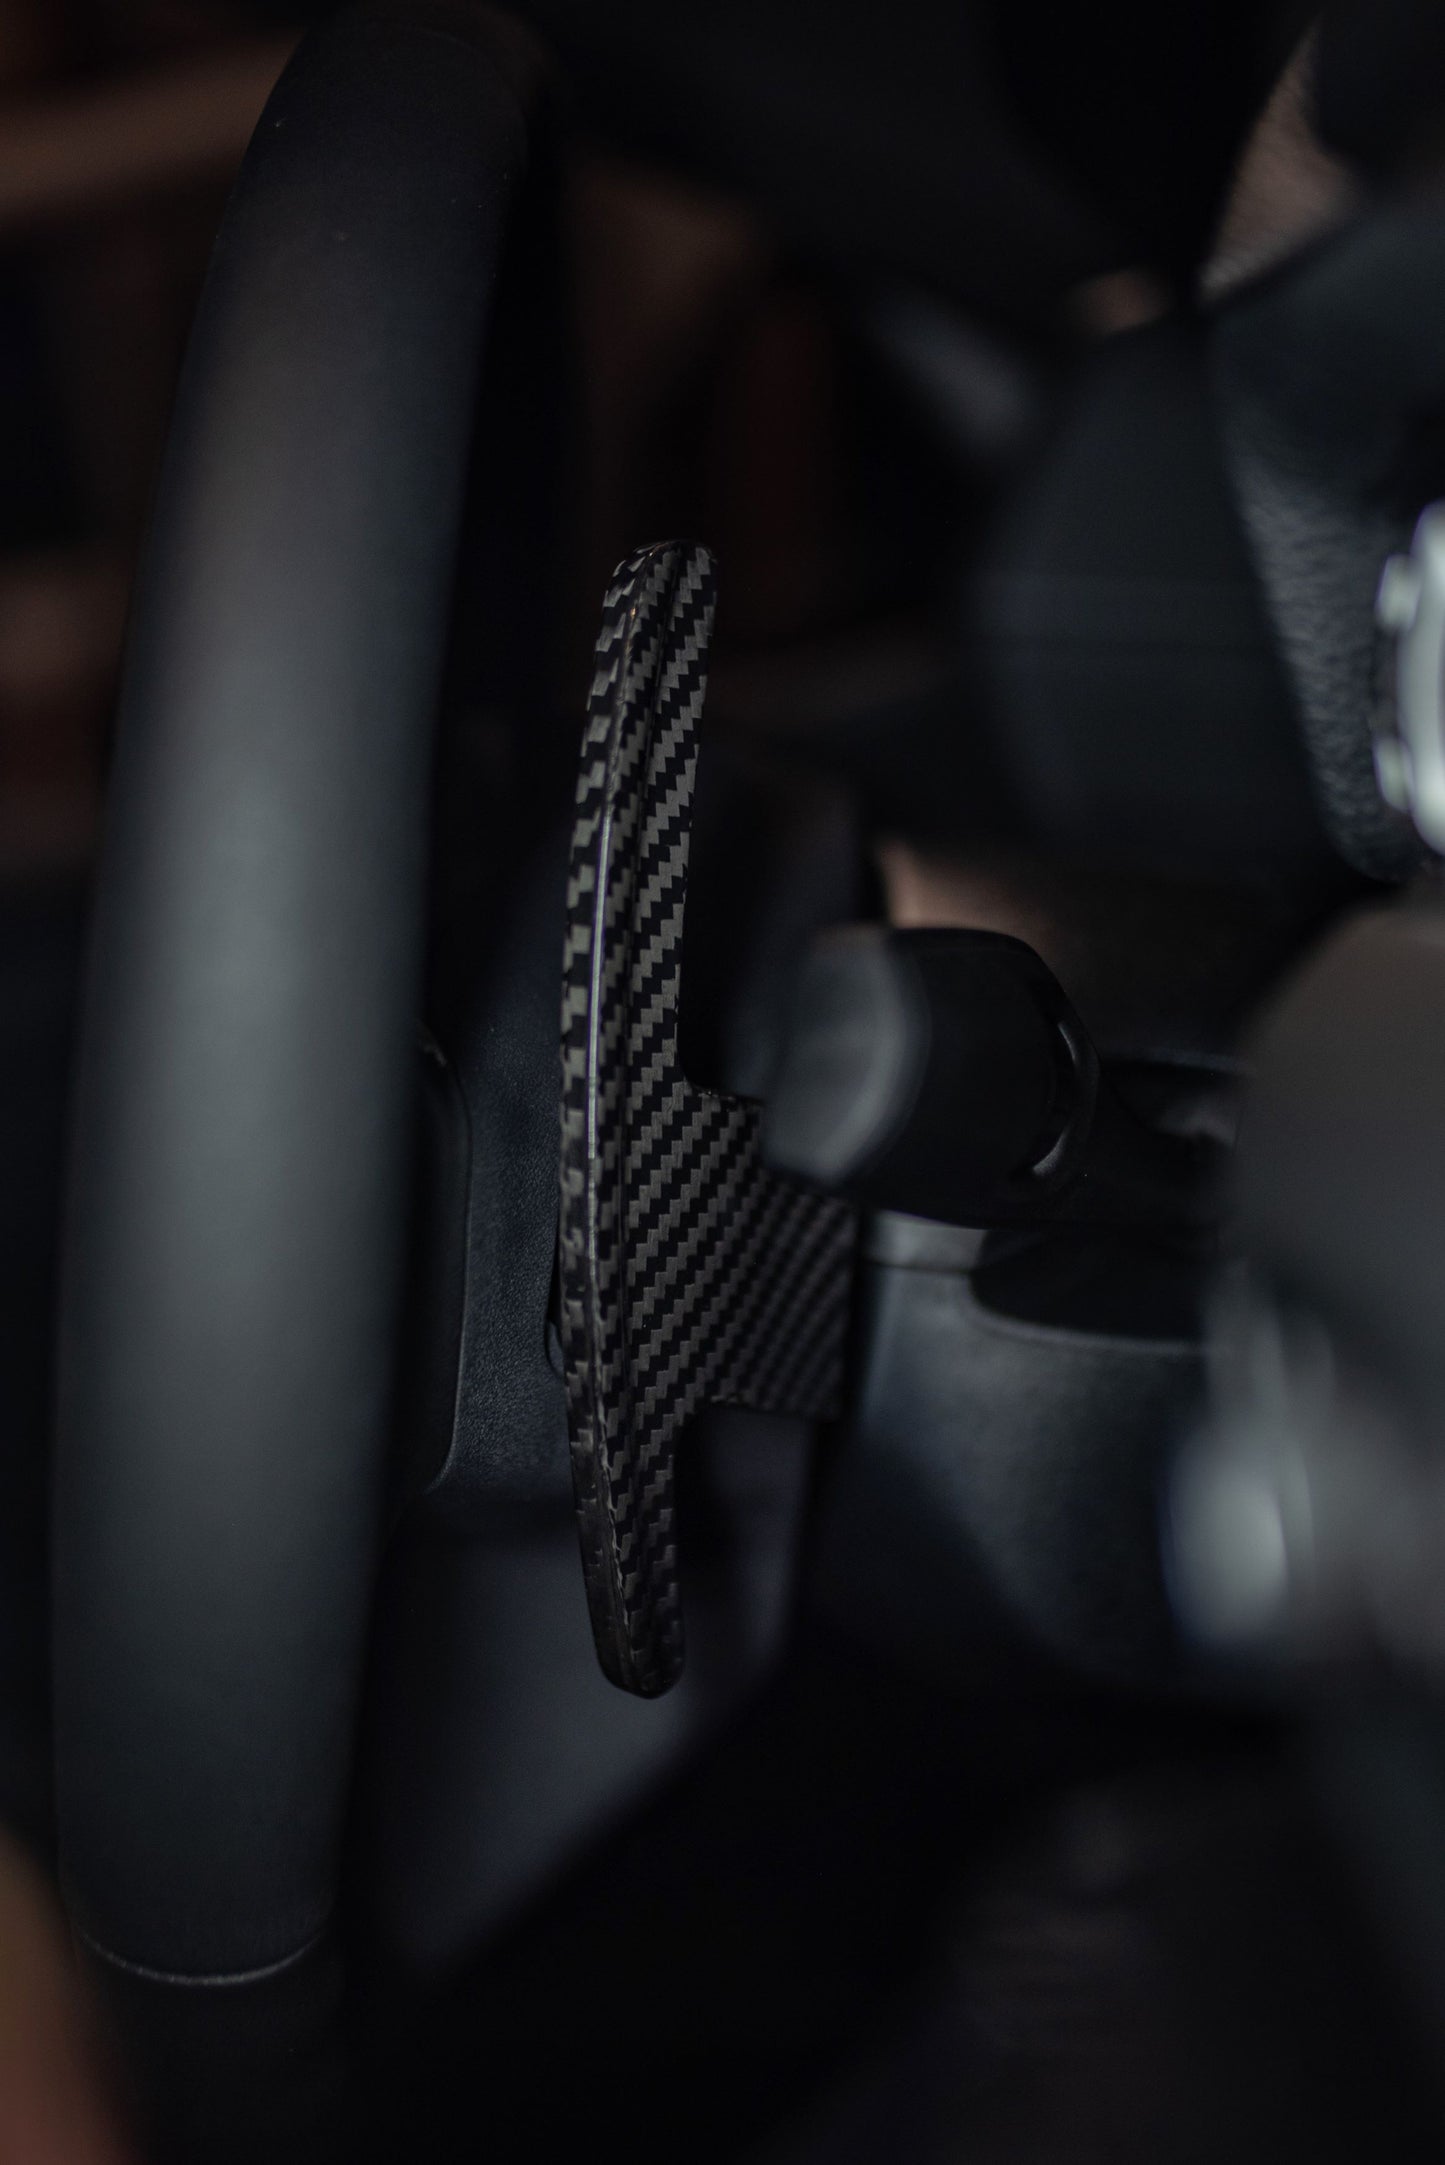 BMW G Chassis Carbon Paddle Shifters - Gloss